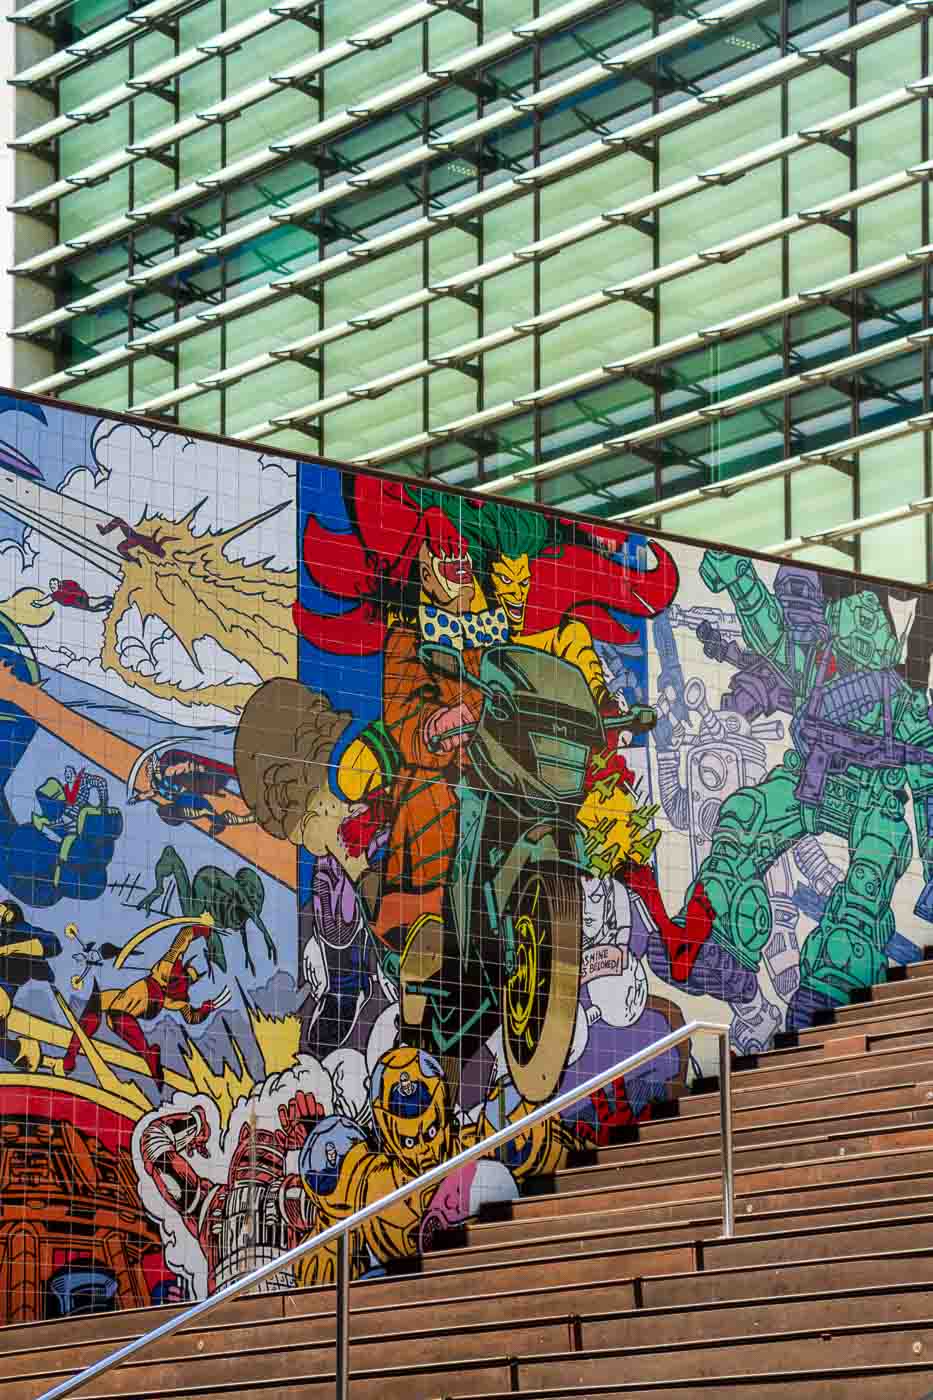 And for a pop-culture explosion, check out Erró's giant mural featuring comic book superheroes! It's a vibrant art piece that adds playful energy to the area. It was interesting to see a bizarre mixture of worlds in the same art piece. It might be the only mural where Superman meets the X-men, and this is not even the most unusual part.